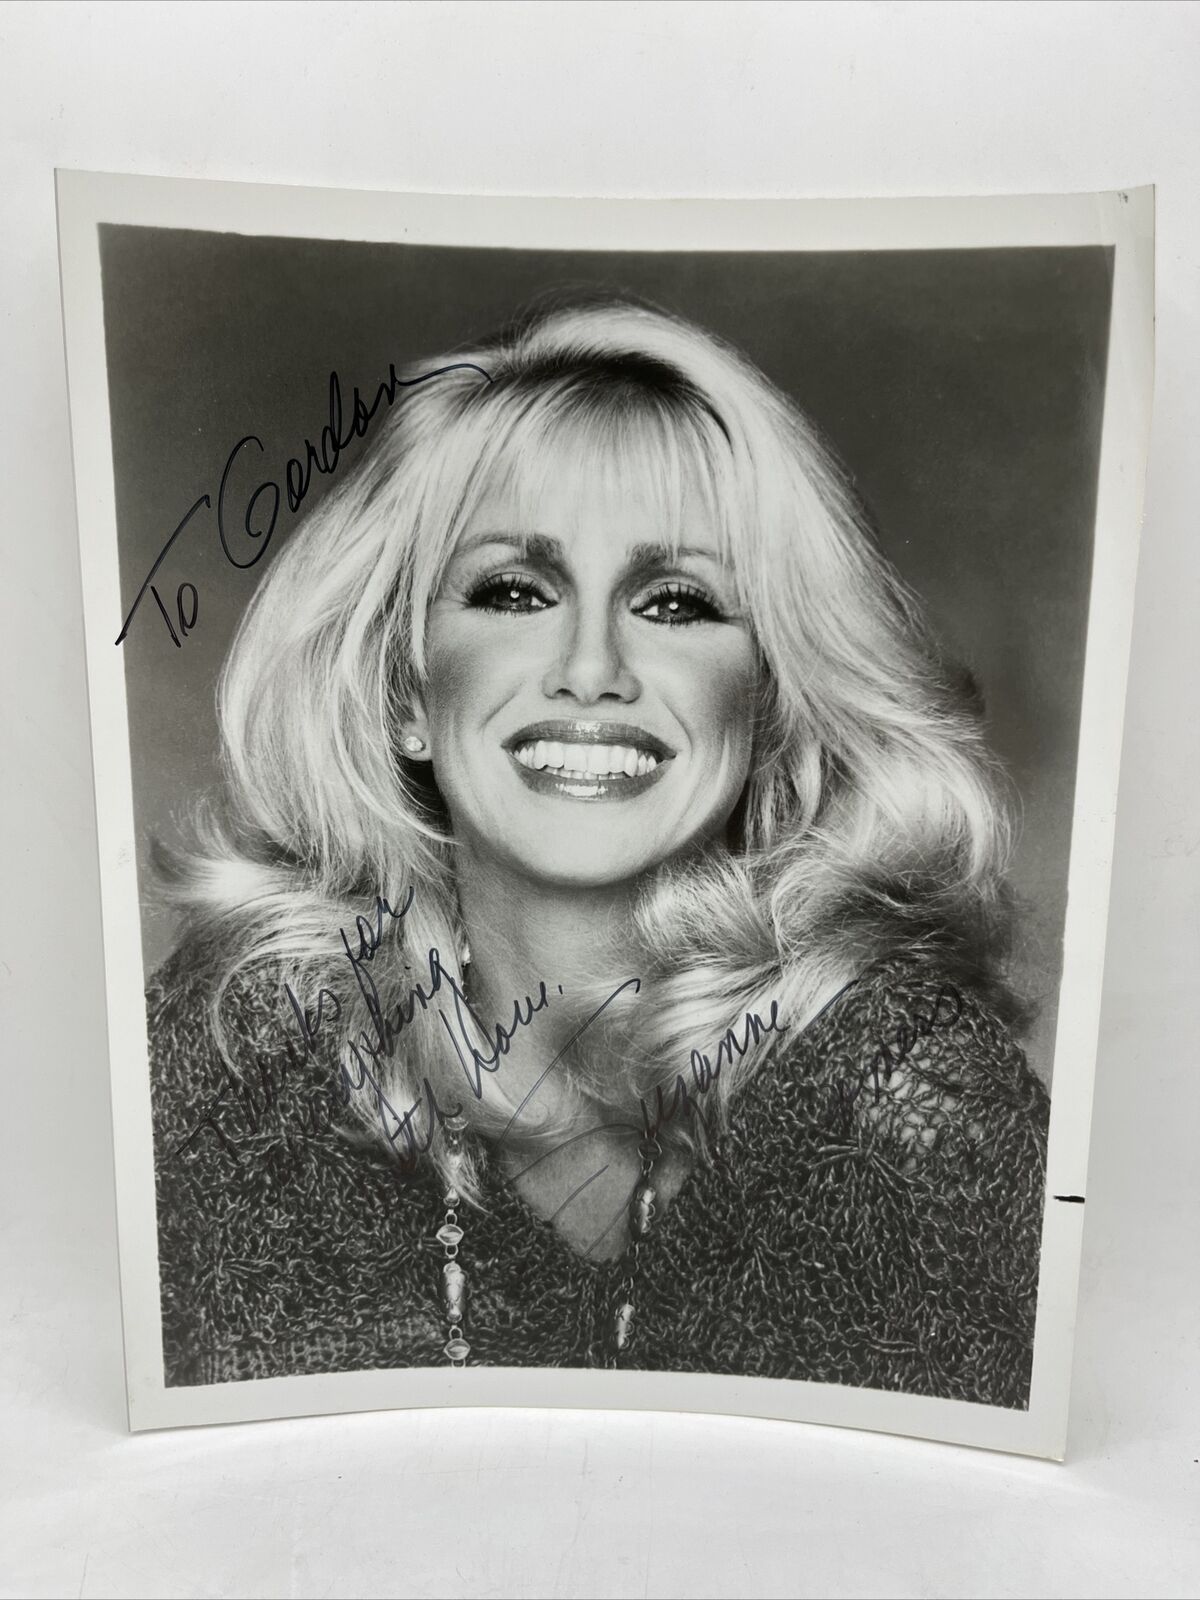 SUZANNE SOMERS SIGNED 8X10 PHOTO VINTAGE THREES COMPANY AUTOGRAPH TO GORDON